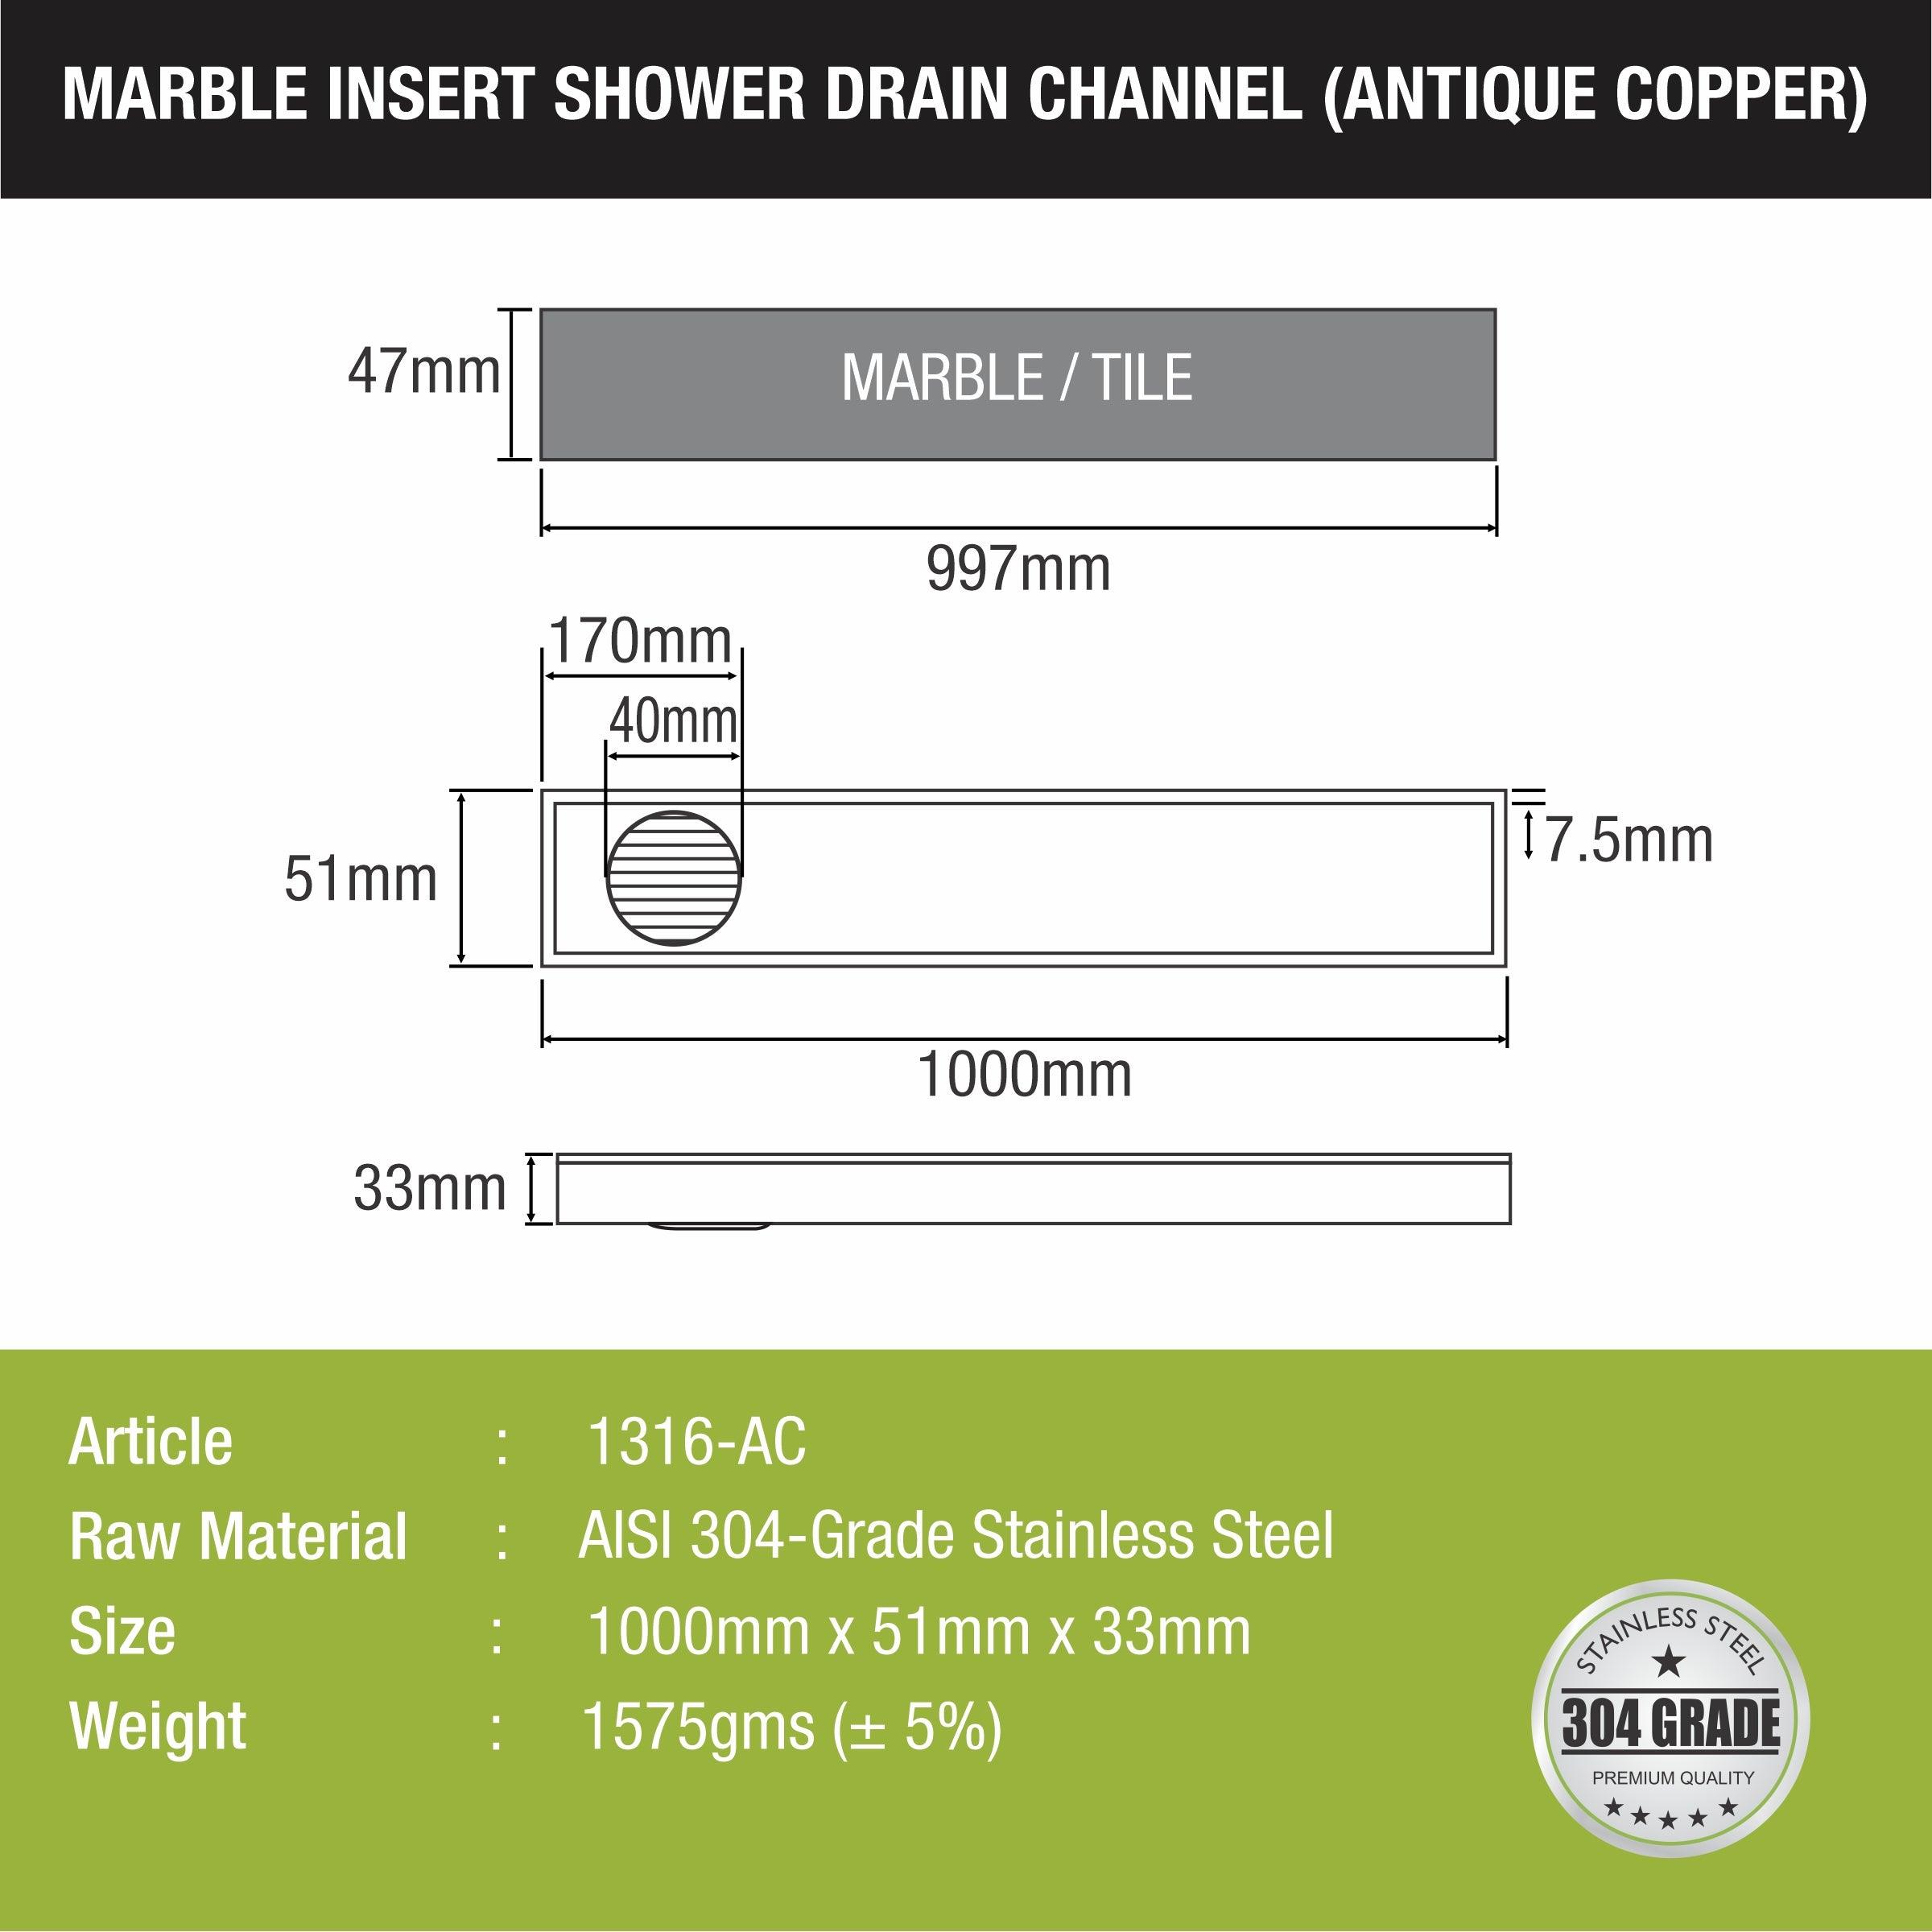 Marble Insert Shower Drain Channel - Antique Copper (40 x 2 Inches) sizes and dimensions